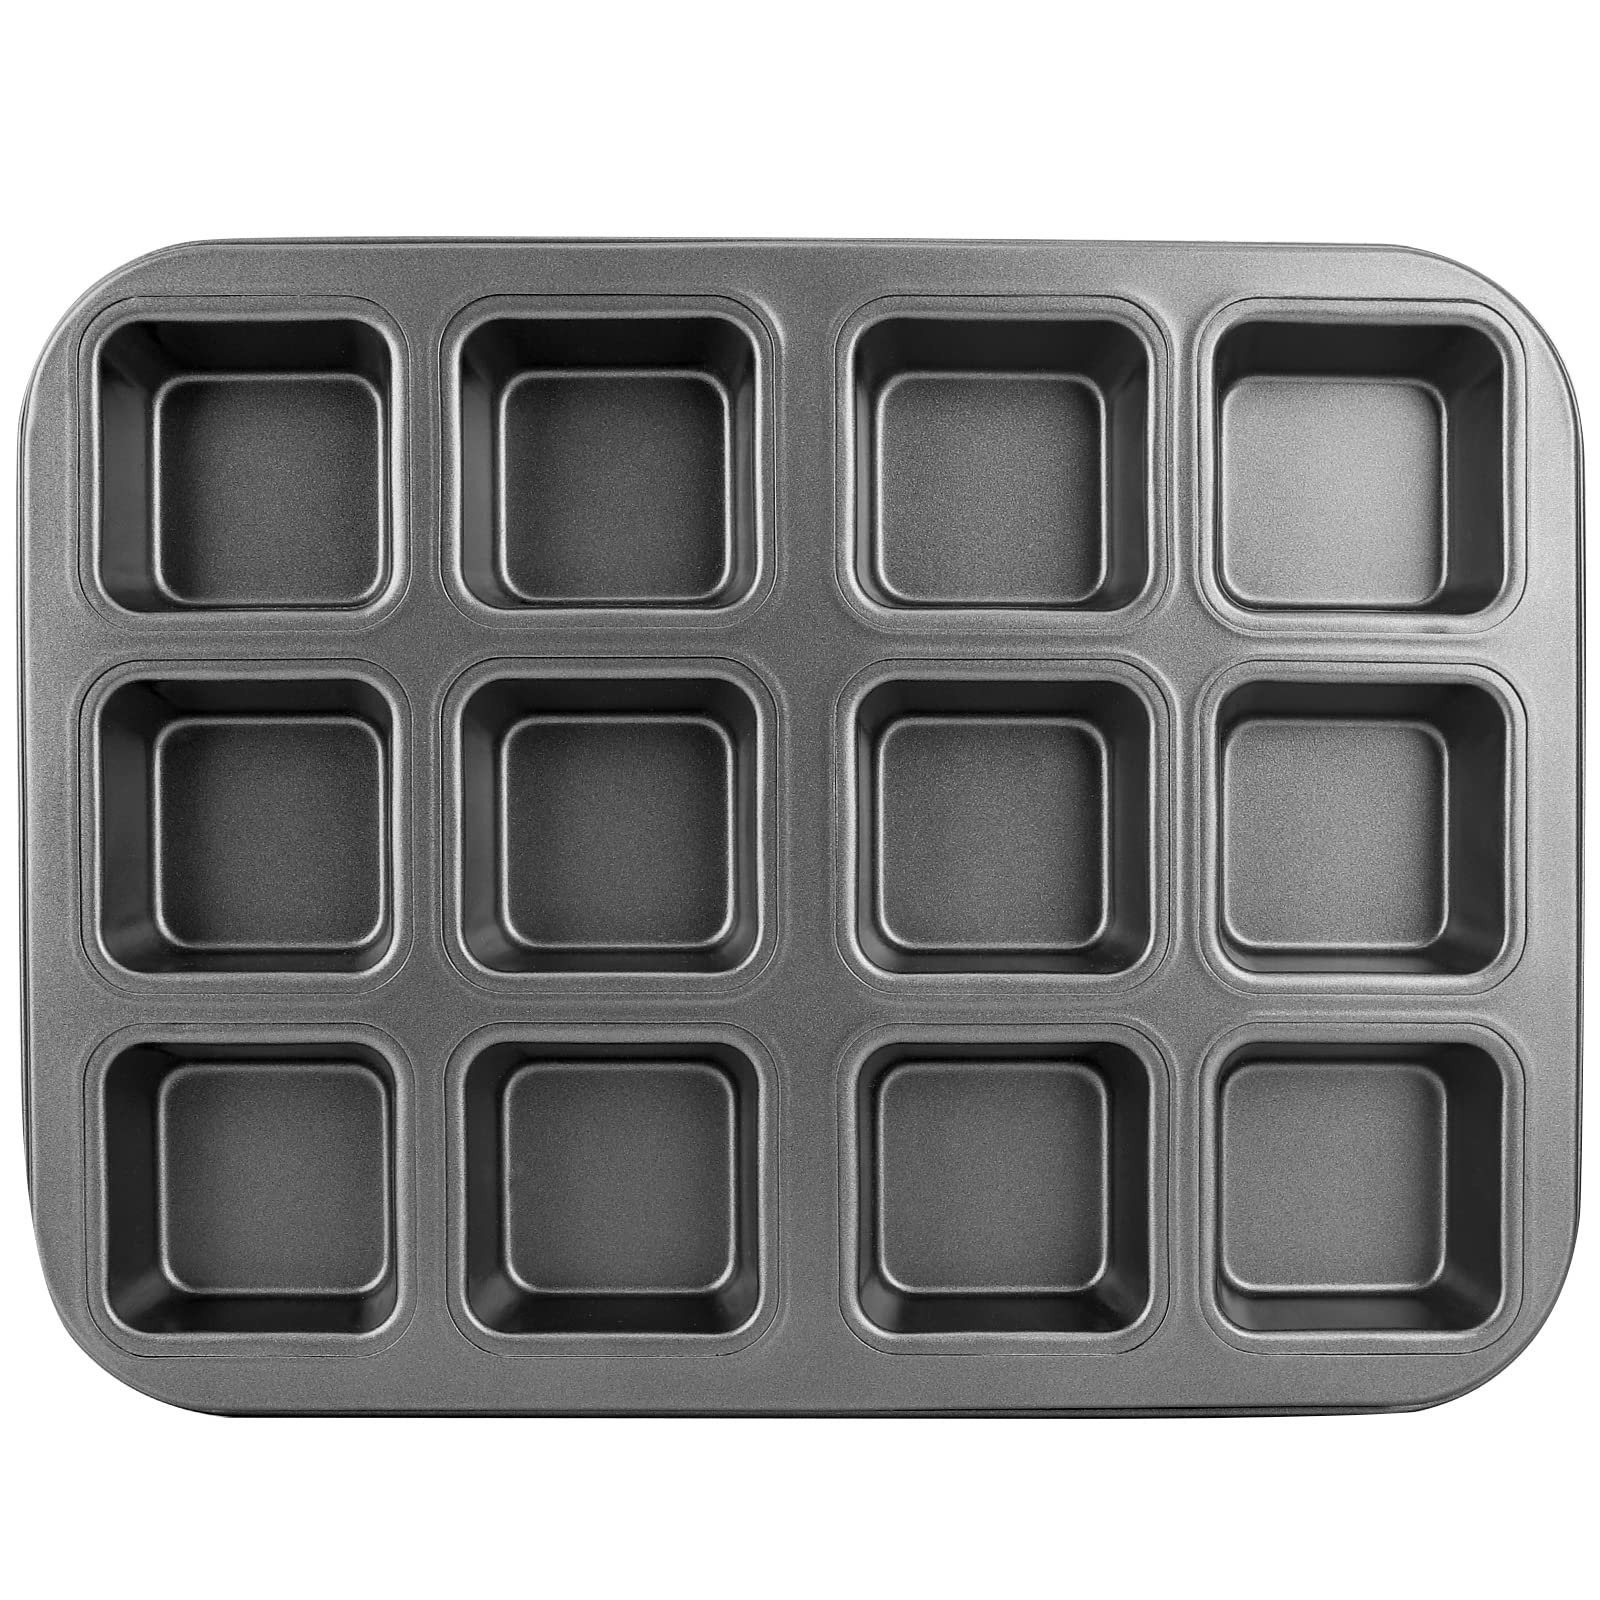 CHEFMADE Nonstick Bite Size Brownie Pan All Edges Mini Loaf Pan for Baking, Heavy Duty Carbon Steel Square Brownie Pan Muffin Cupcake Pans